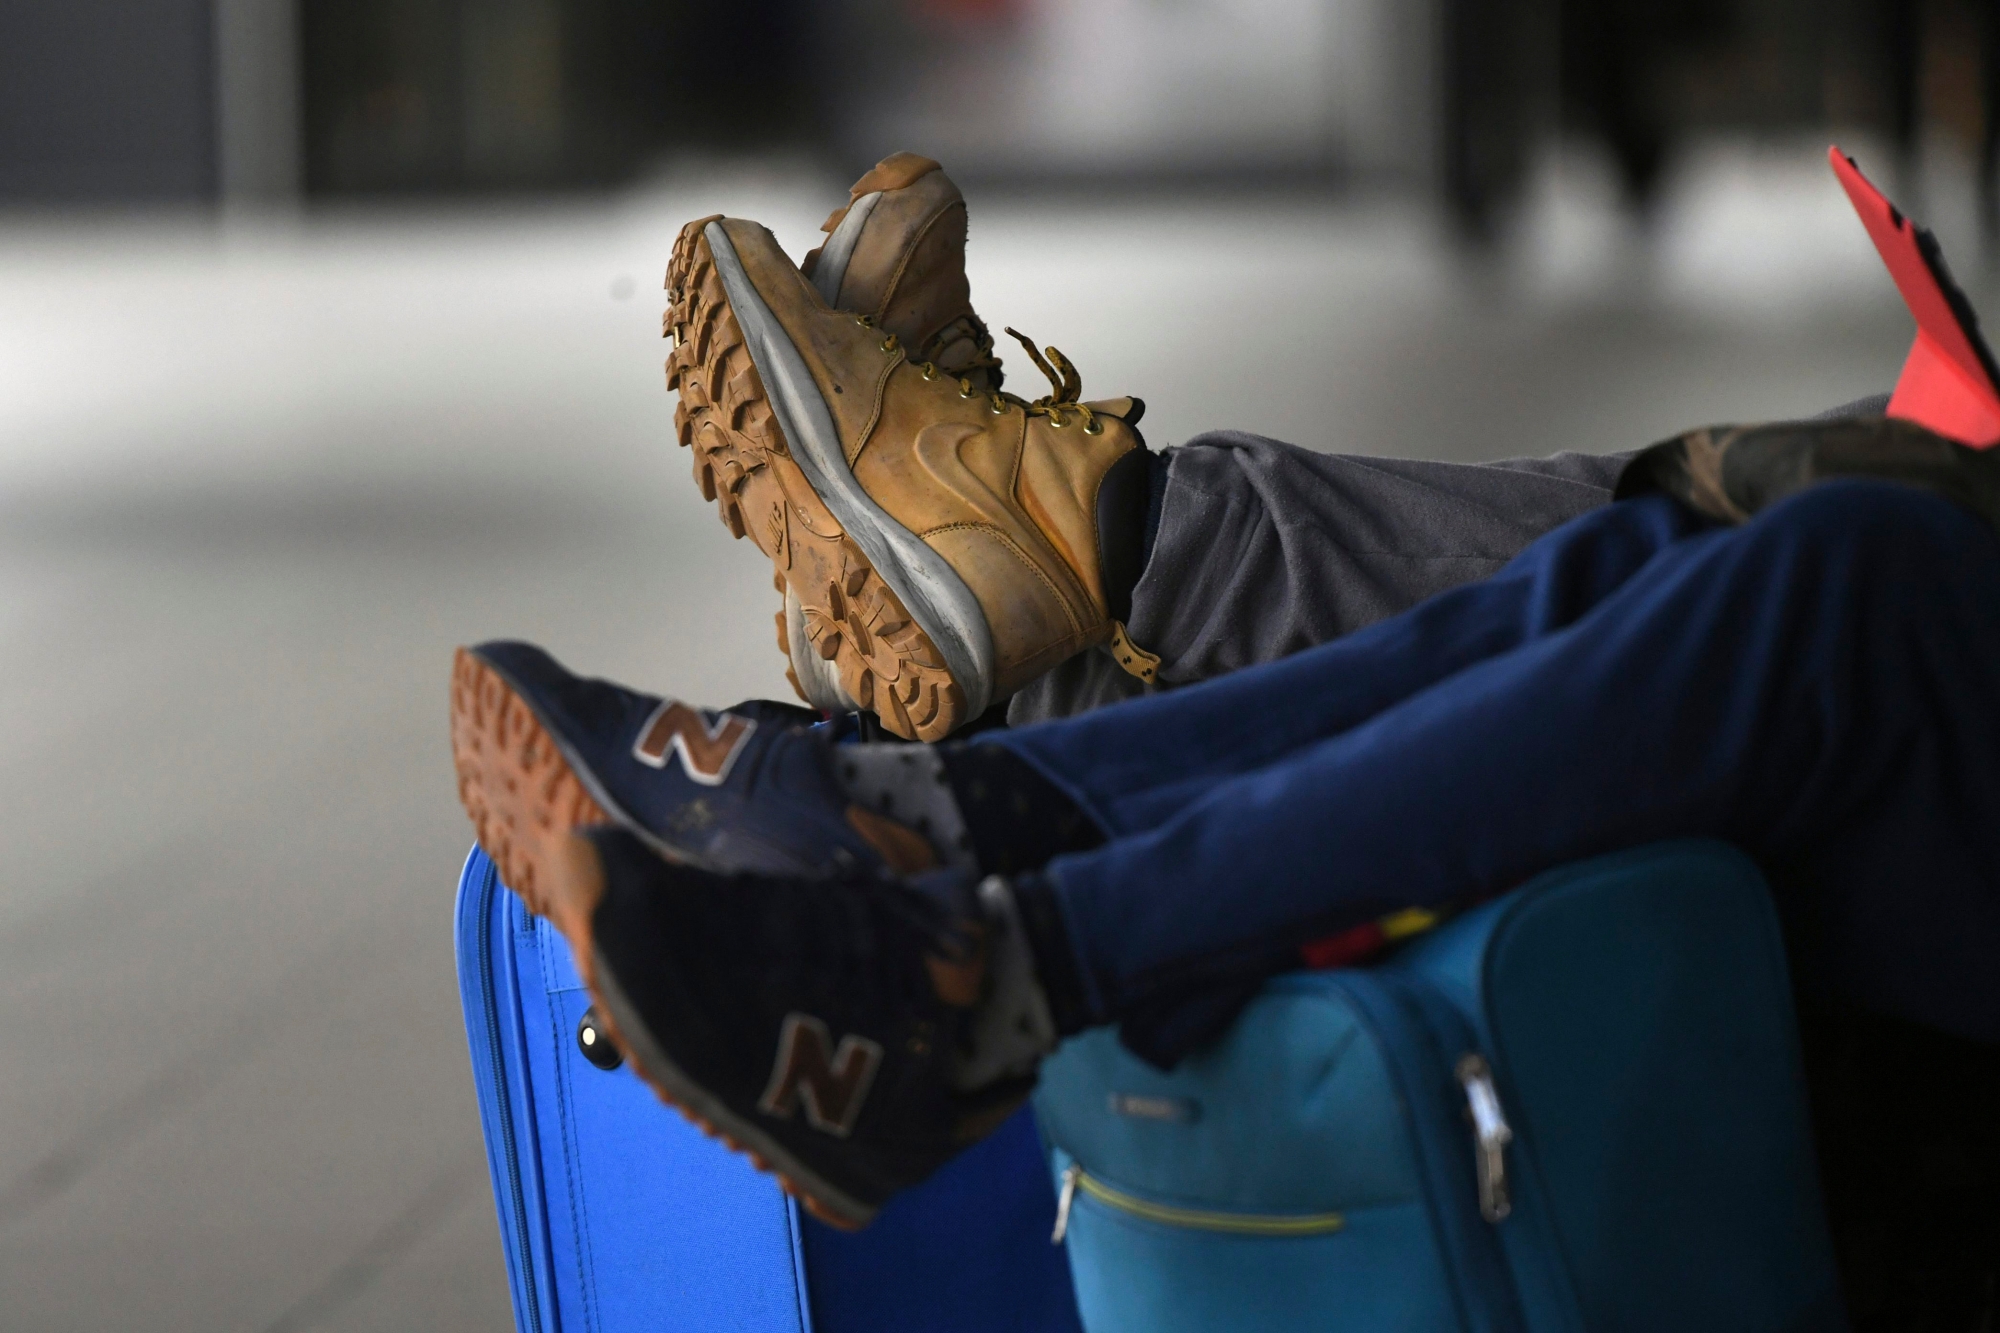 Travelers  wait at Schoenefeld airport outside Berlin, Germany,  Monday, March 13, 2017.  Ground staff at Berlin's two airports went on strike Monday for the second time in four days, forcing the cancellation of hundreds of flights. (Ralf Hirschberger/dpa via AP) Germany Airport Strike